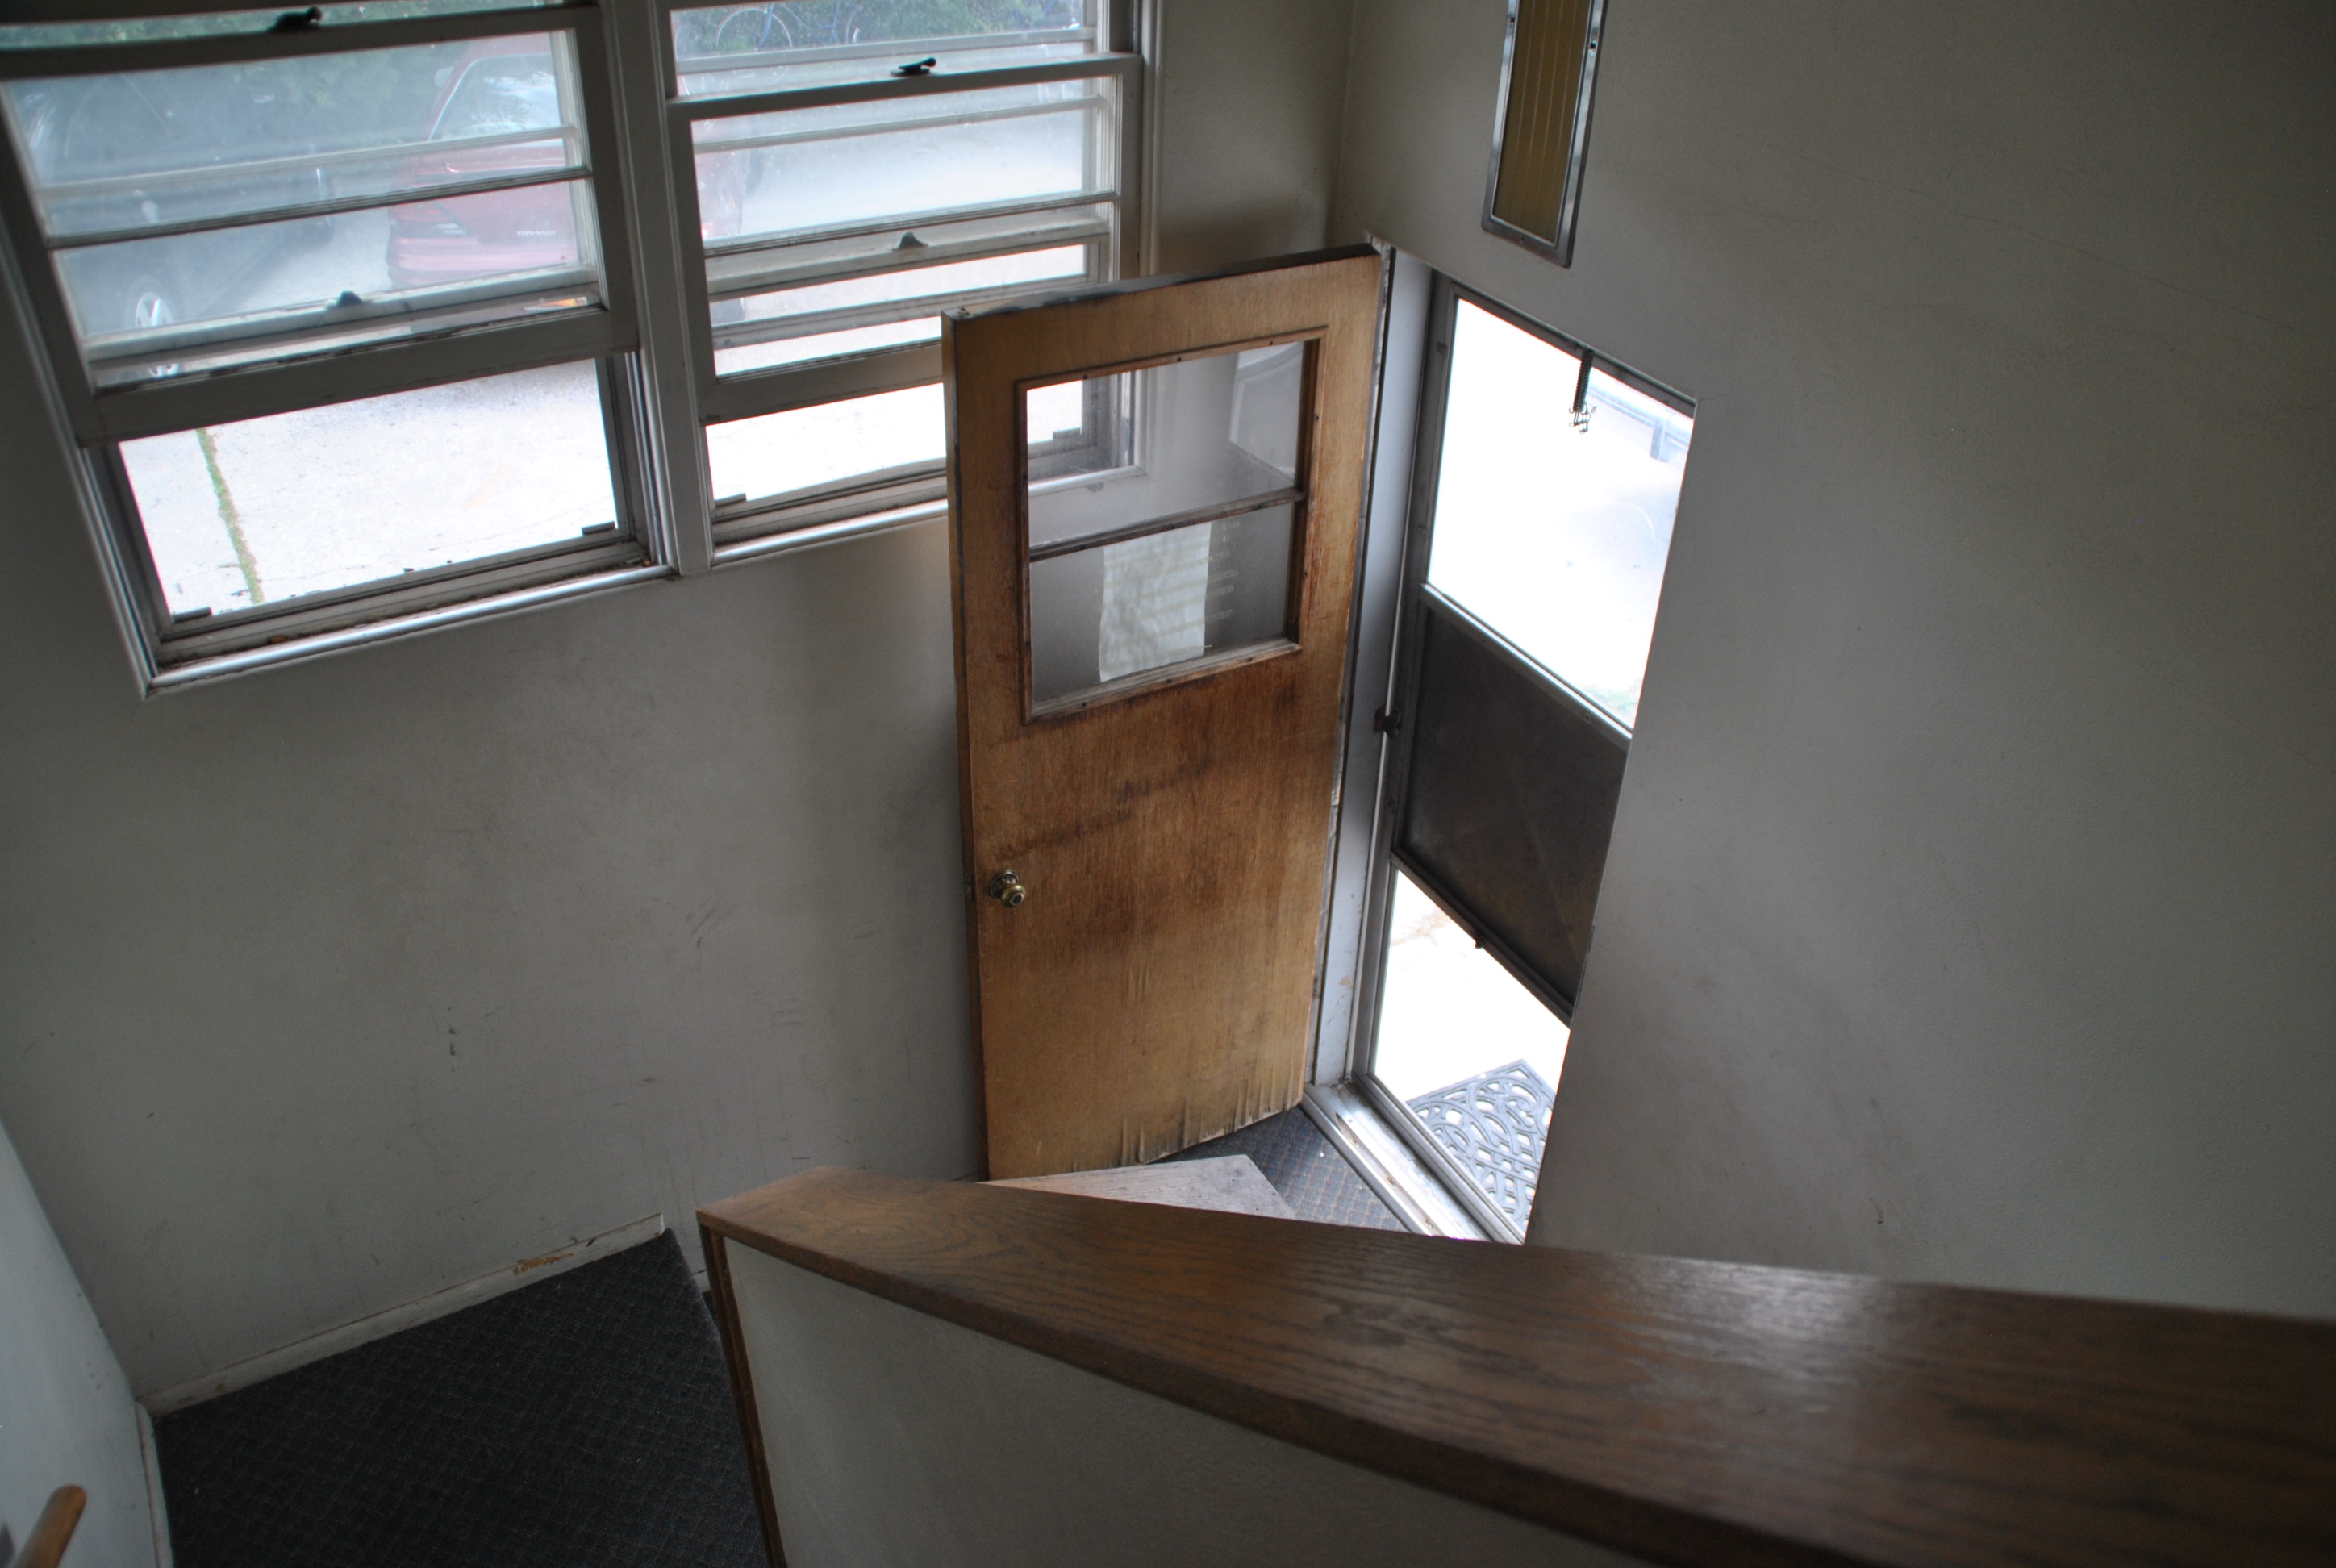 The backdoor, easily accessible from apartment #5 - photo by C.S. Hagen